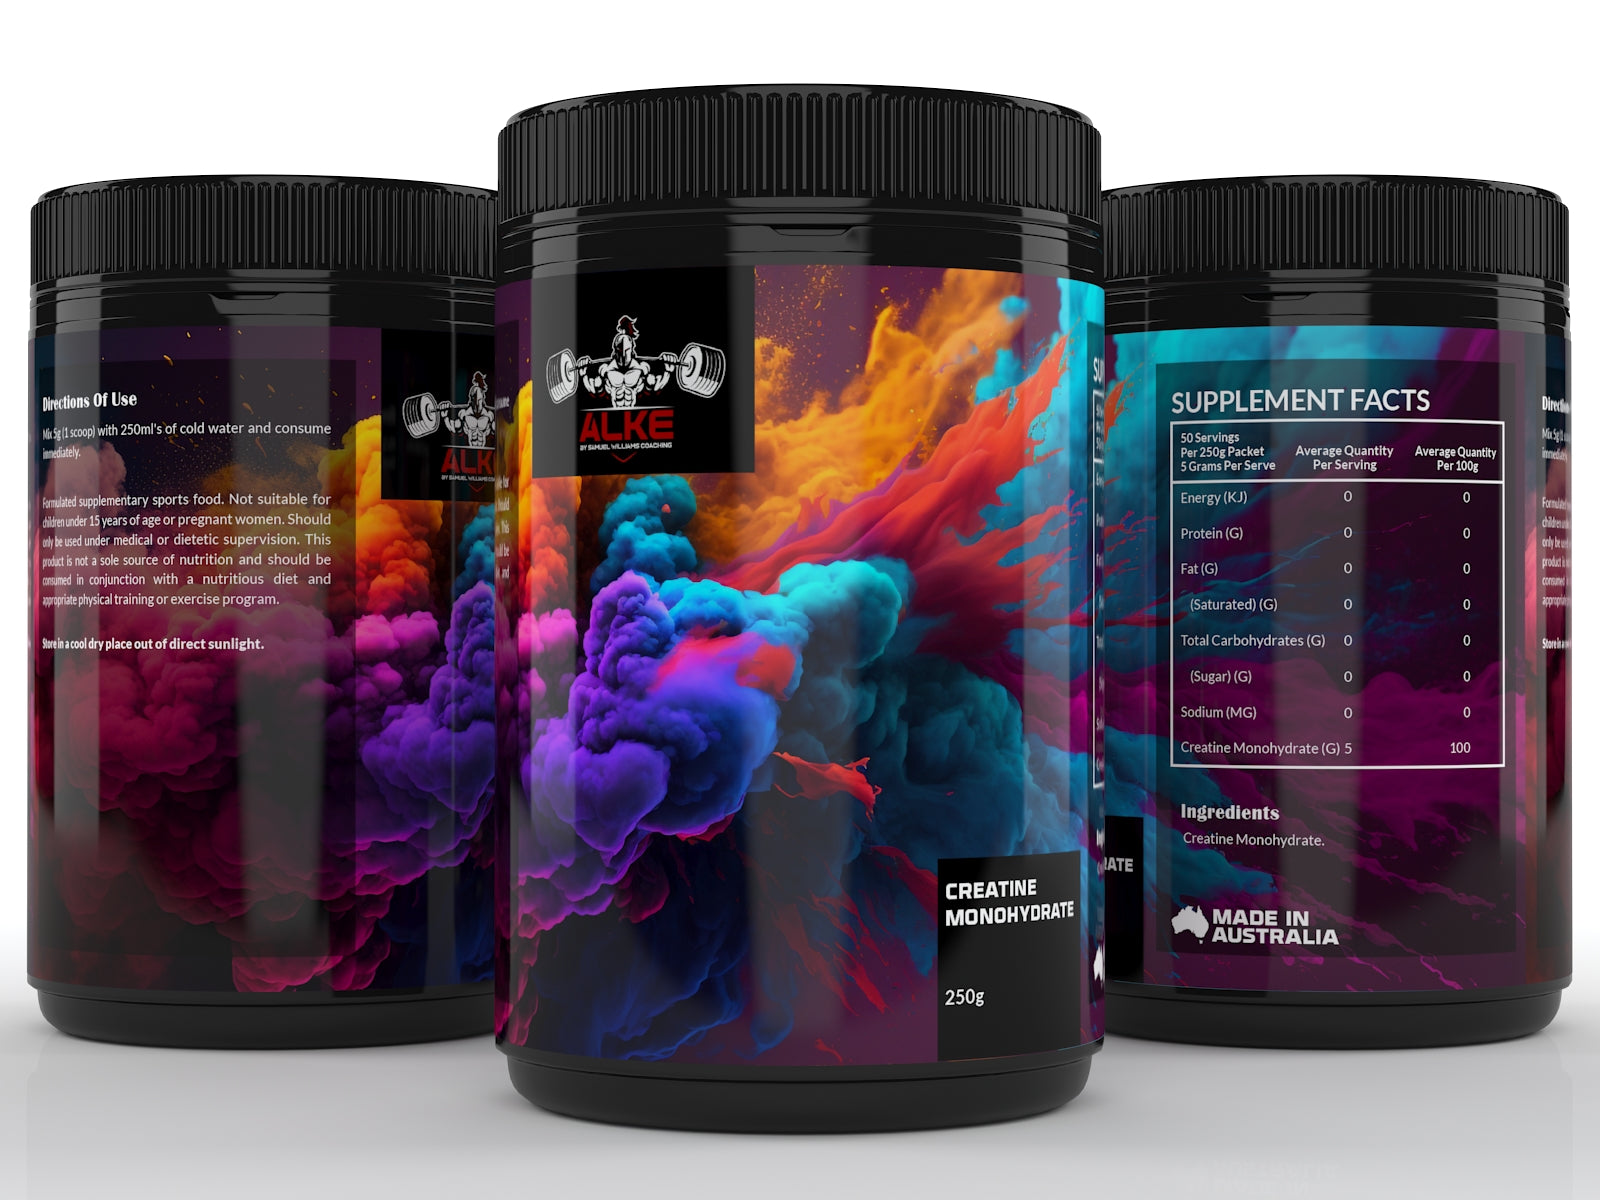 Home page  Pre-Workout  Trending  Supplements